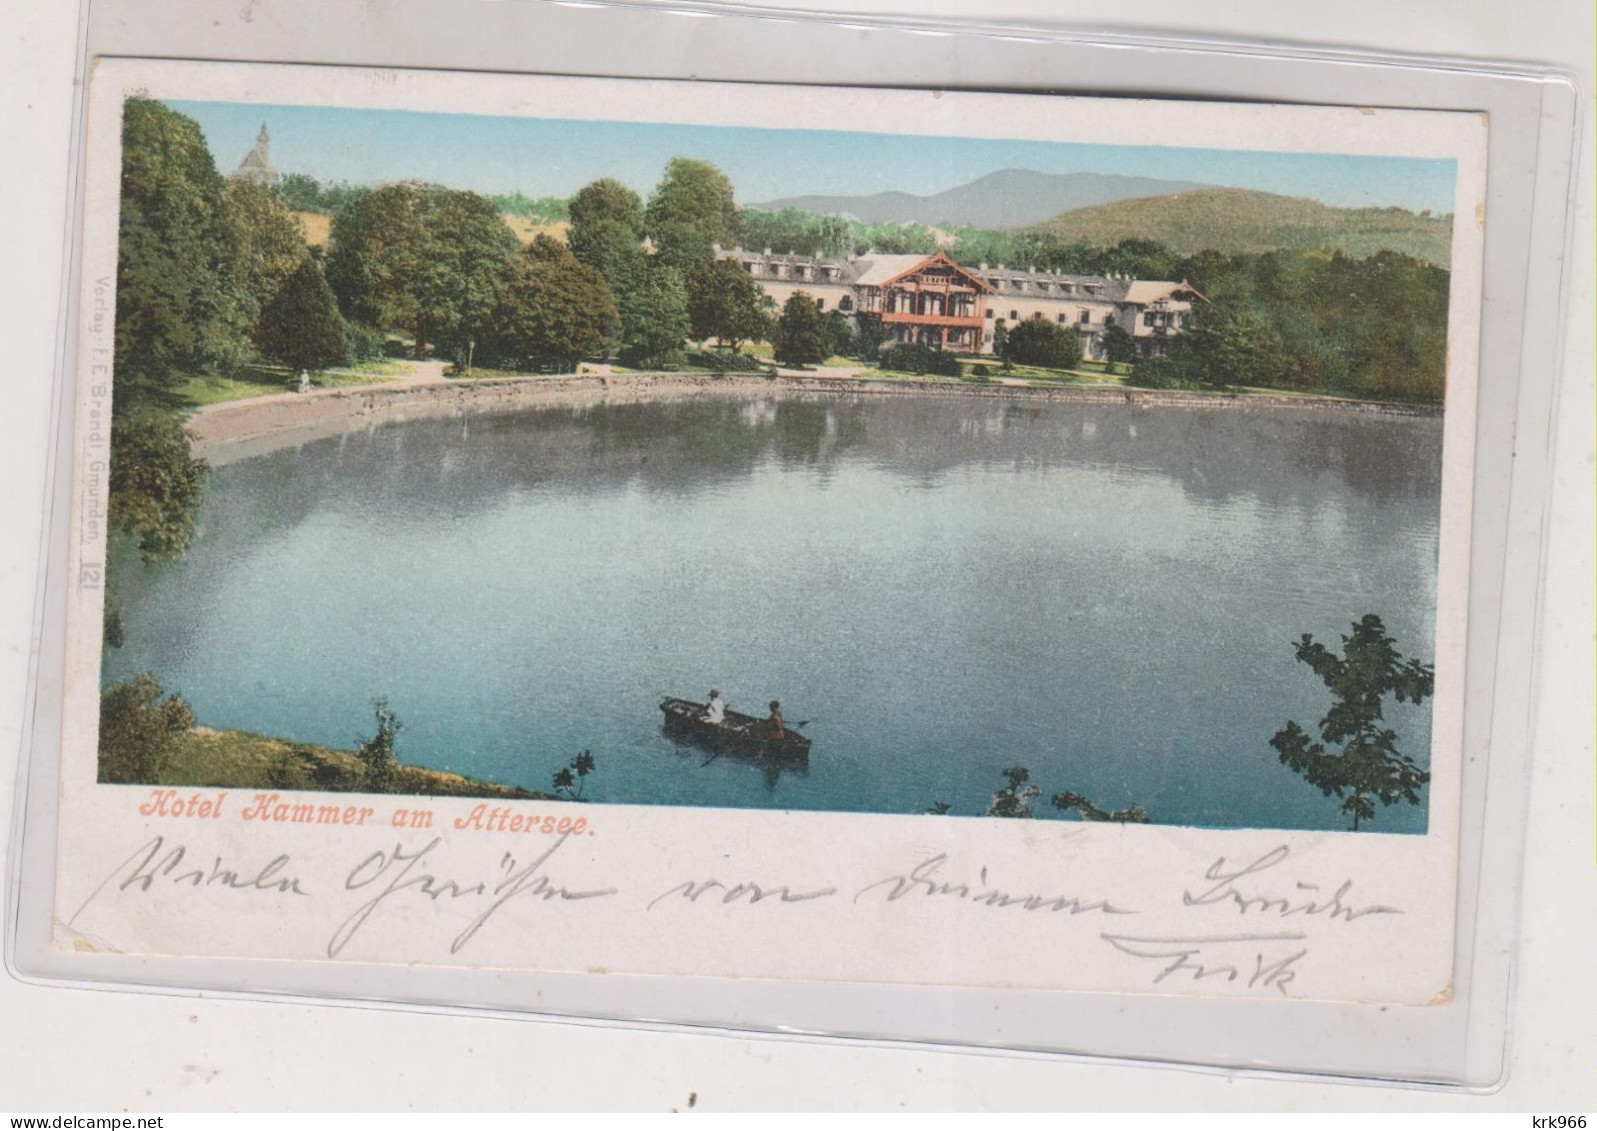 AUSTRIA HOTEL KAMMER Am ALTERSEE Nice  Postcard - Attersee-Orte